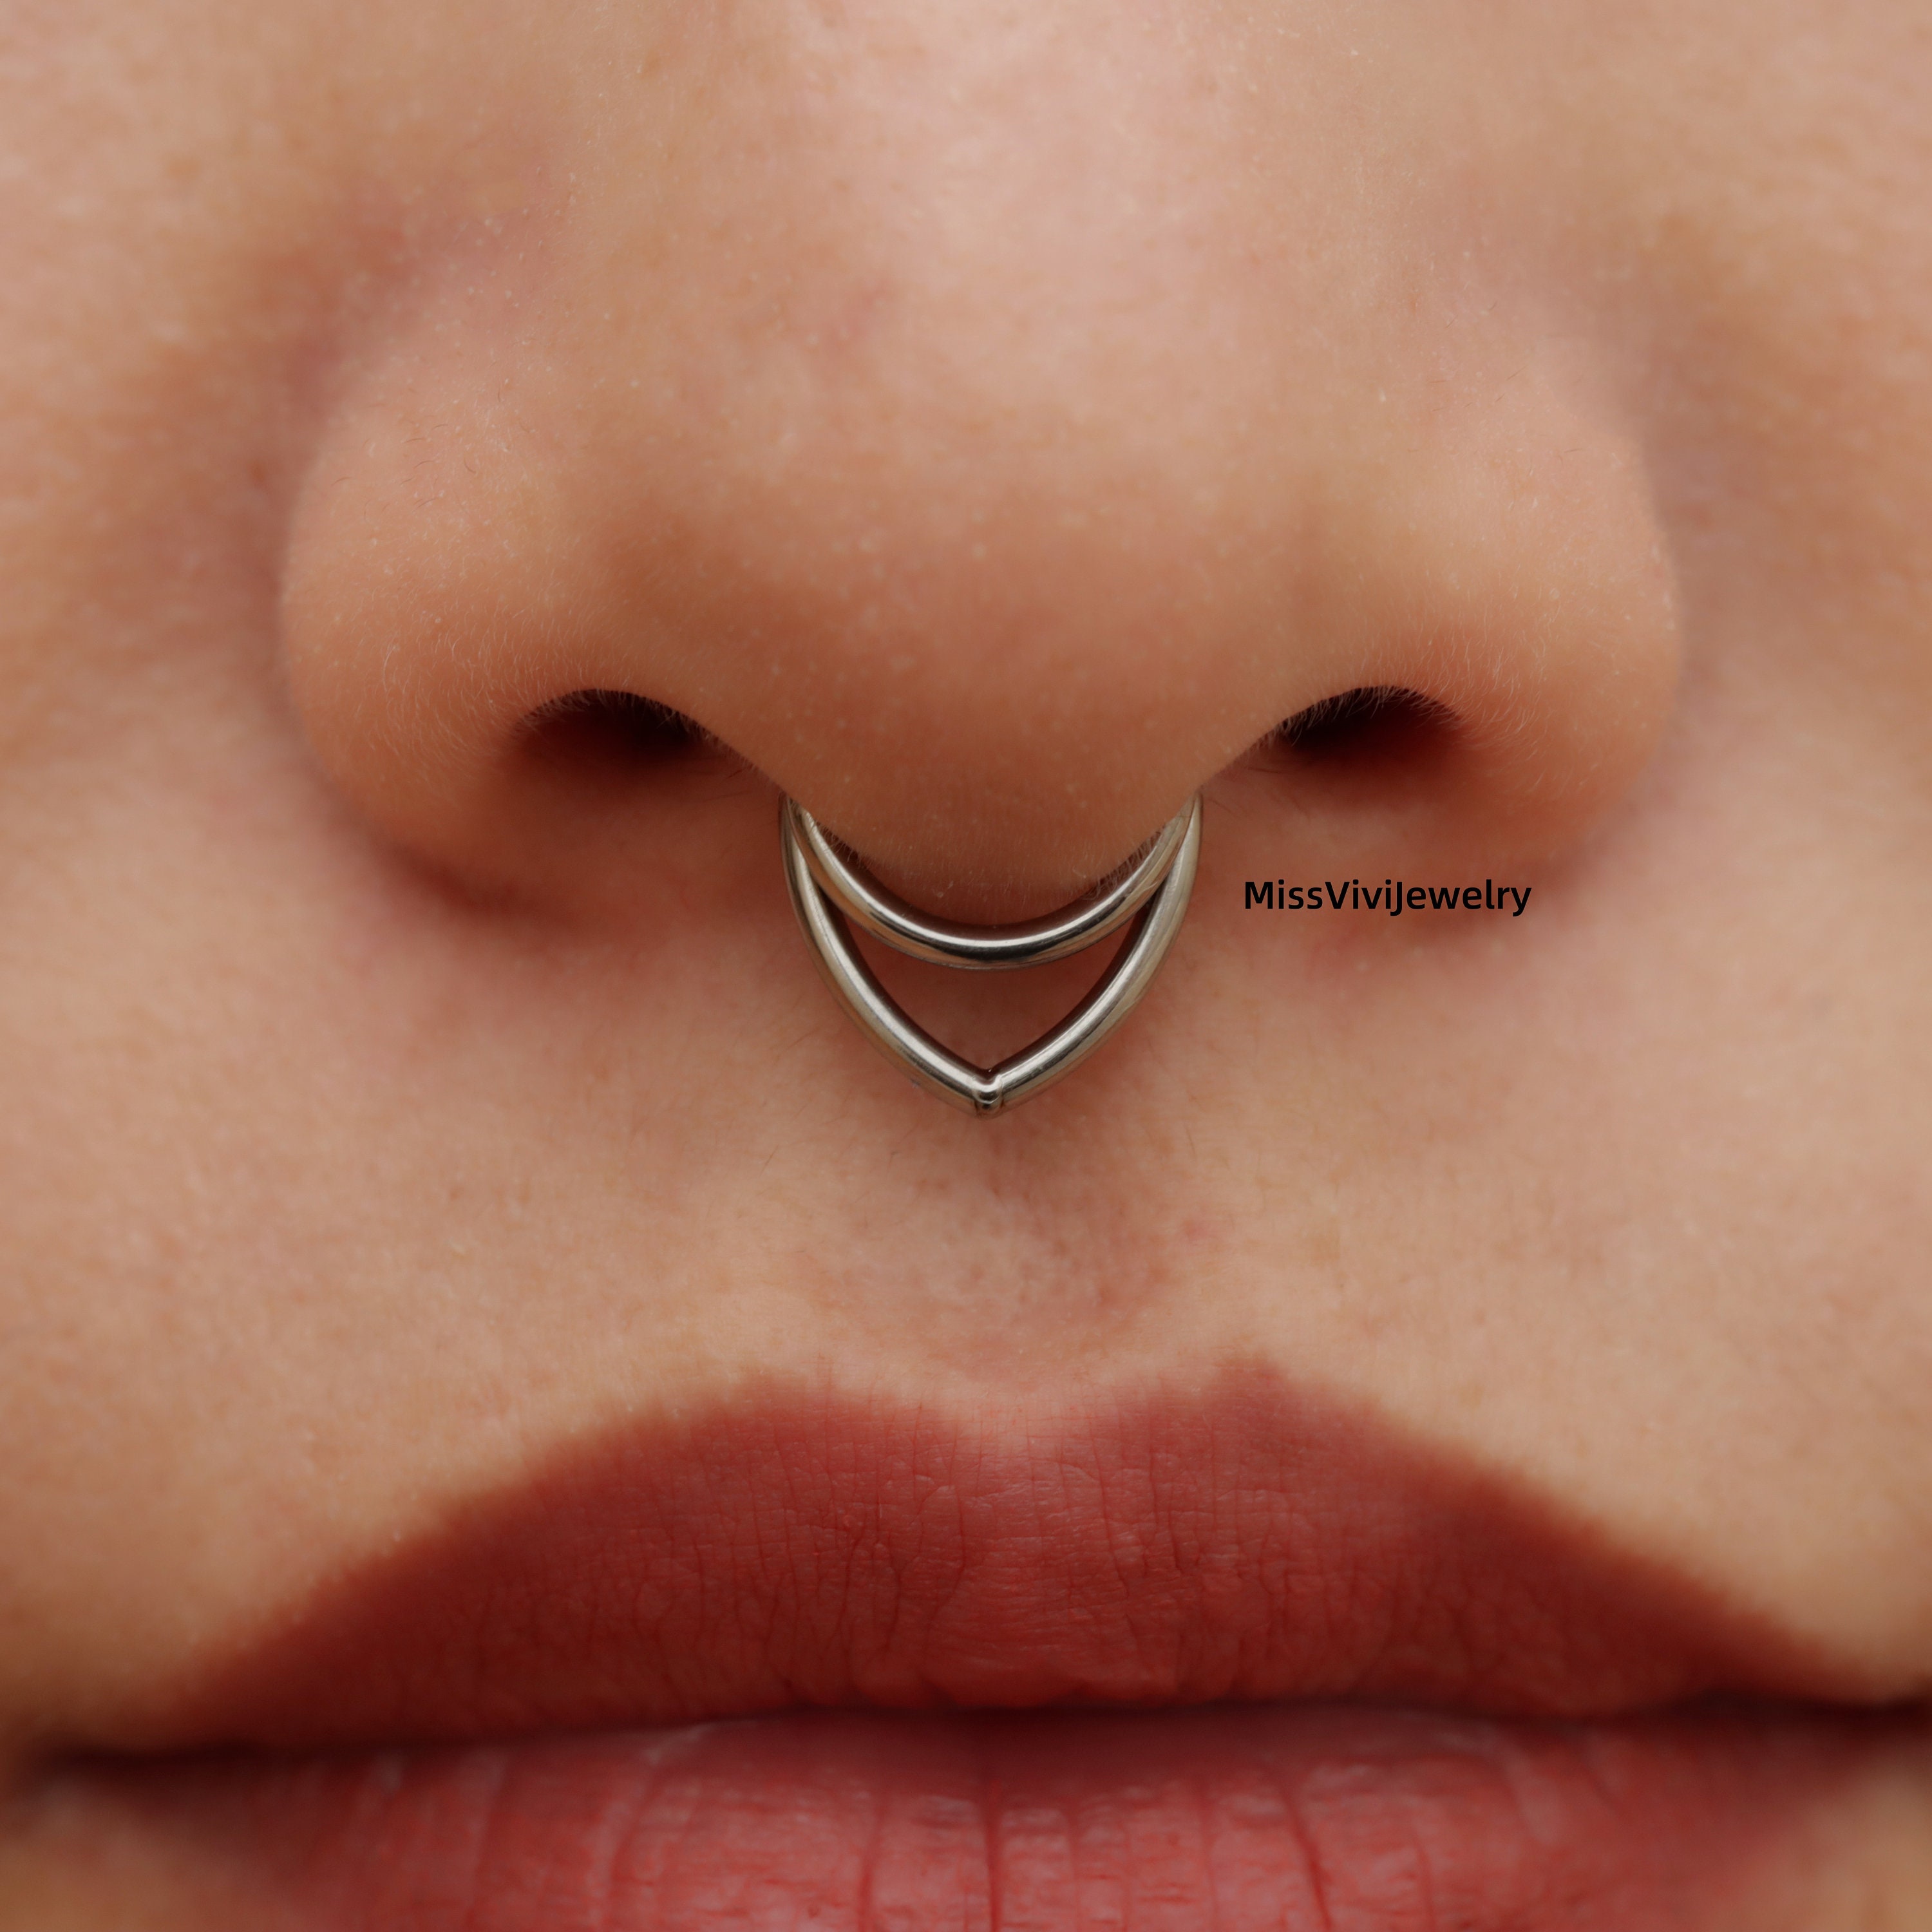 The 13 Best Types Of Nose Rings And Jewelry | Nose ring, Septum nose rings, Septum  nose piercing